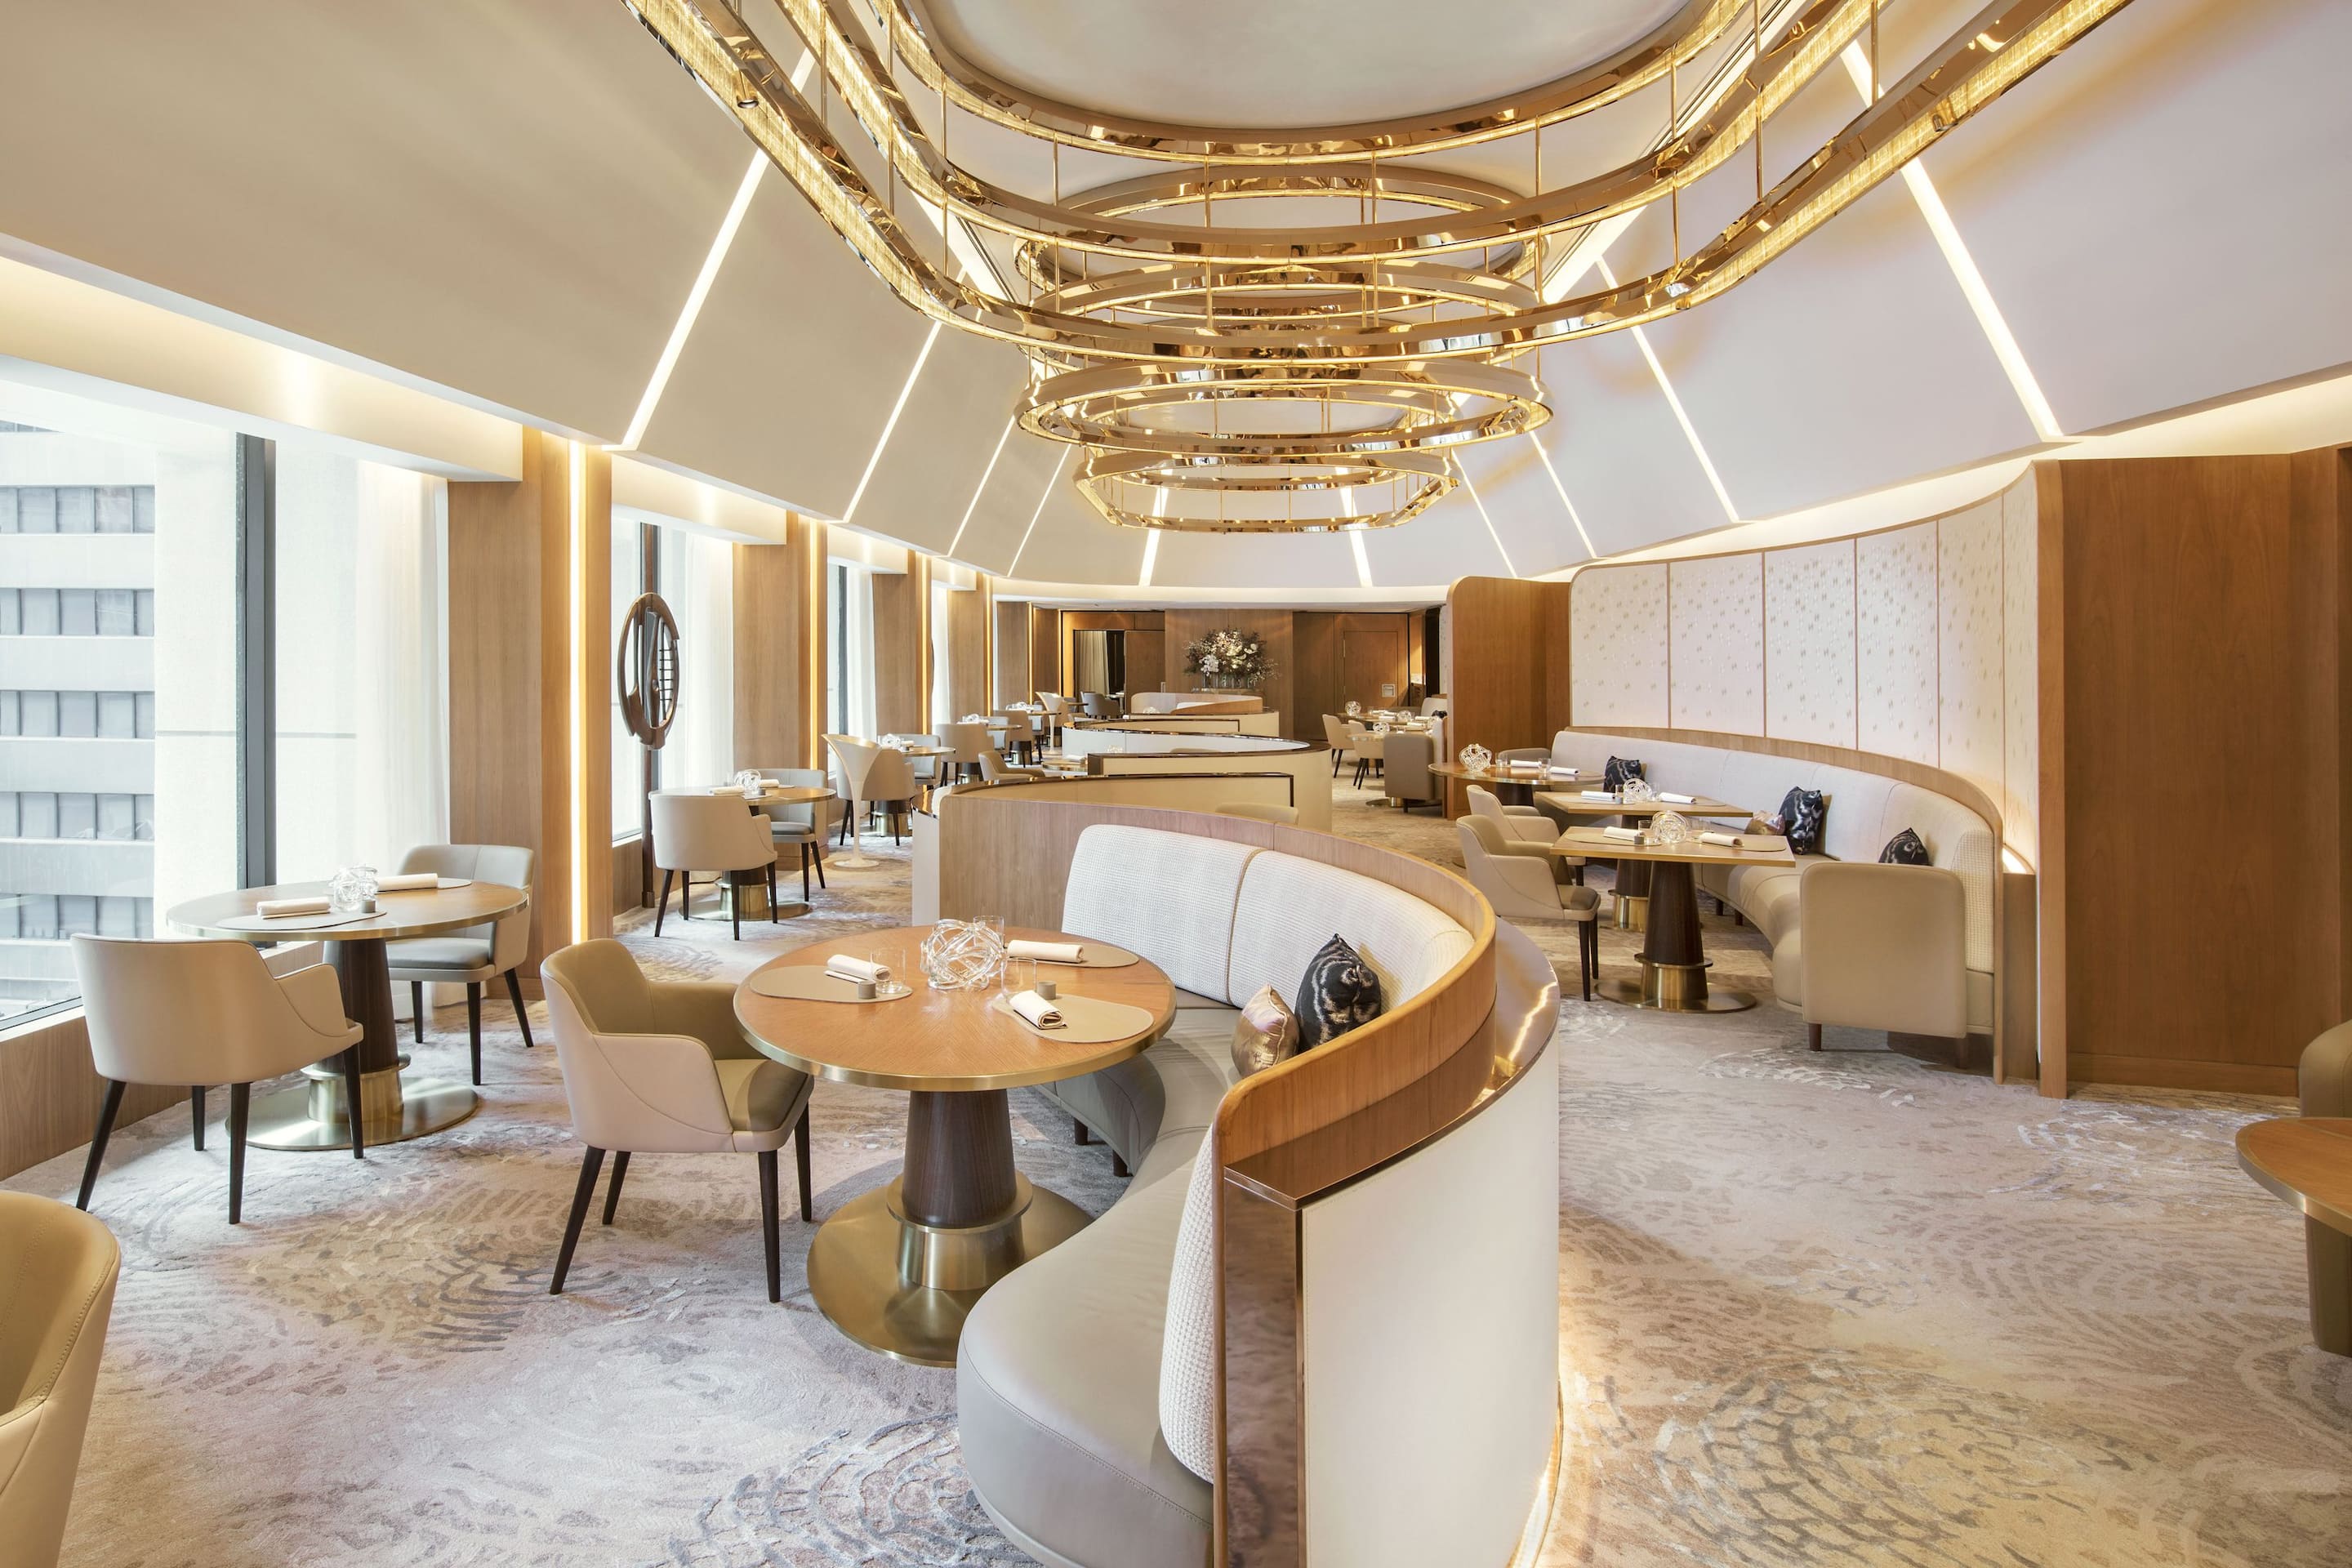 Sleek curved booths and beige hues adorn the interior of Amber at The Landmark, Hong Kong